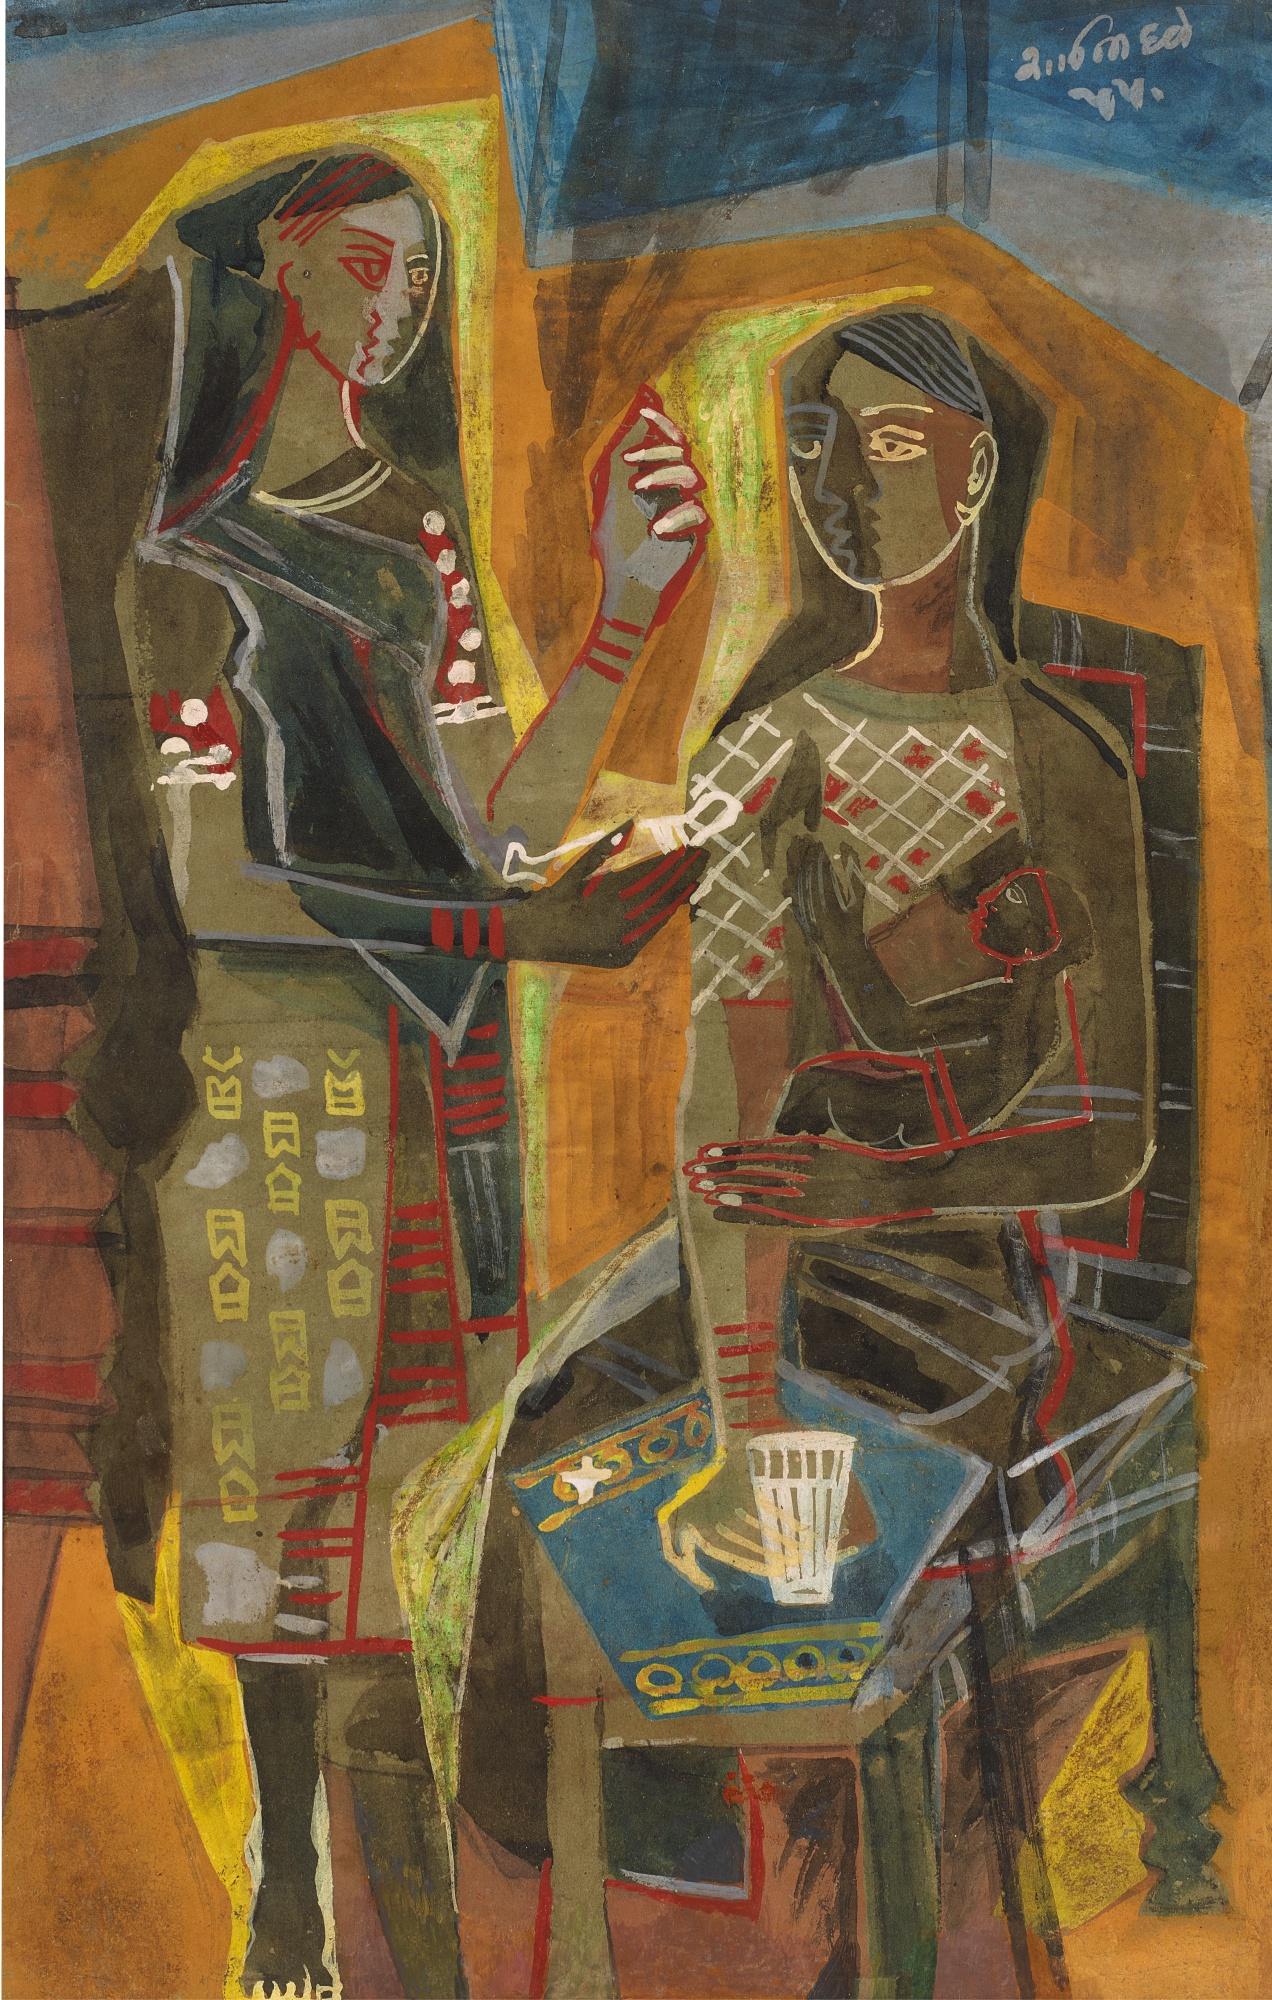 https://www.art.salon/images/shanti-dave_untitled-figures-untitled-mother-and-child_AID173321.jpg?f=grey